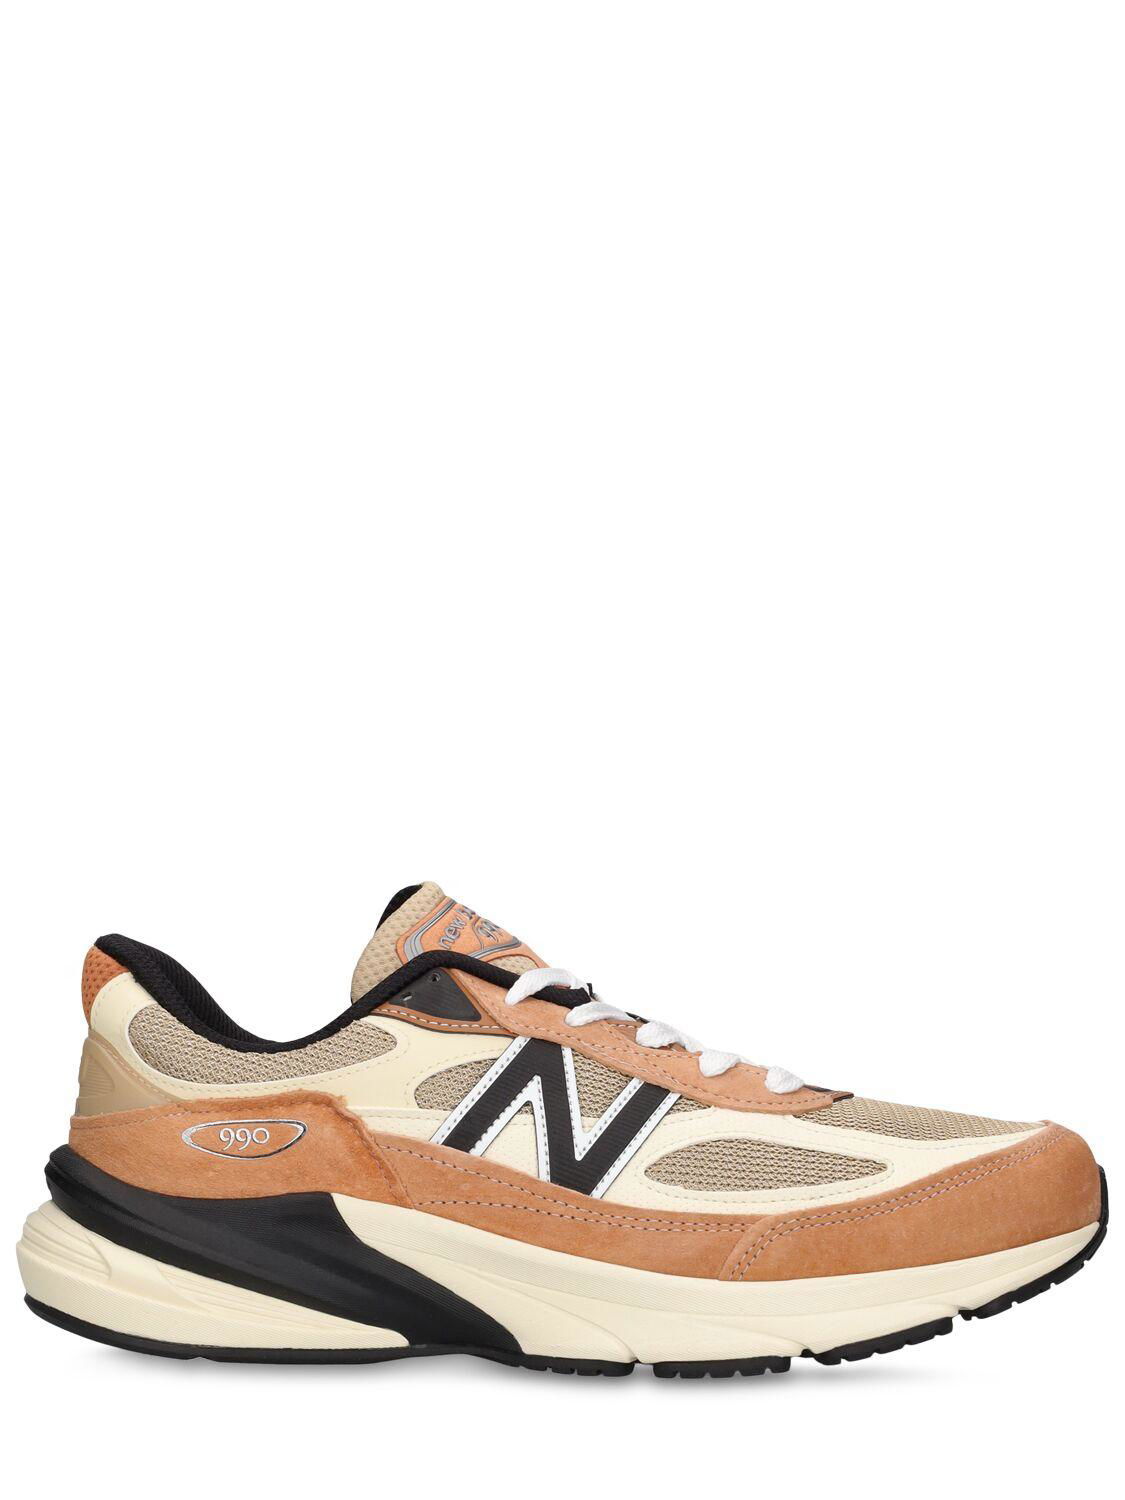 990 Made In Usa Sneakers by NEW BALANCE